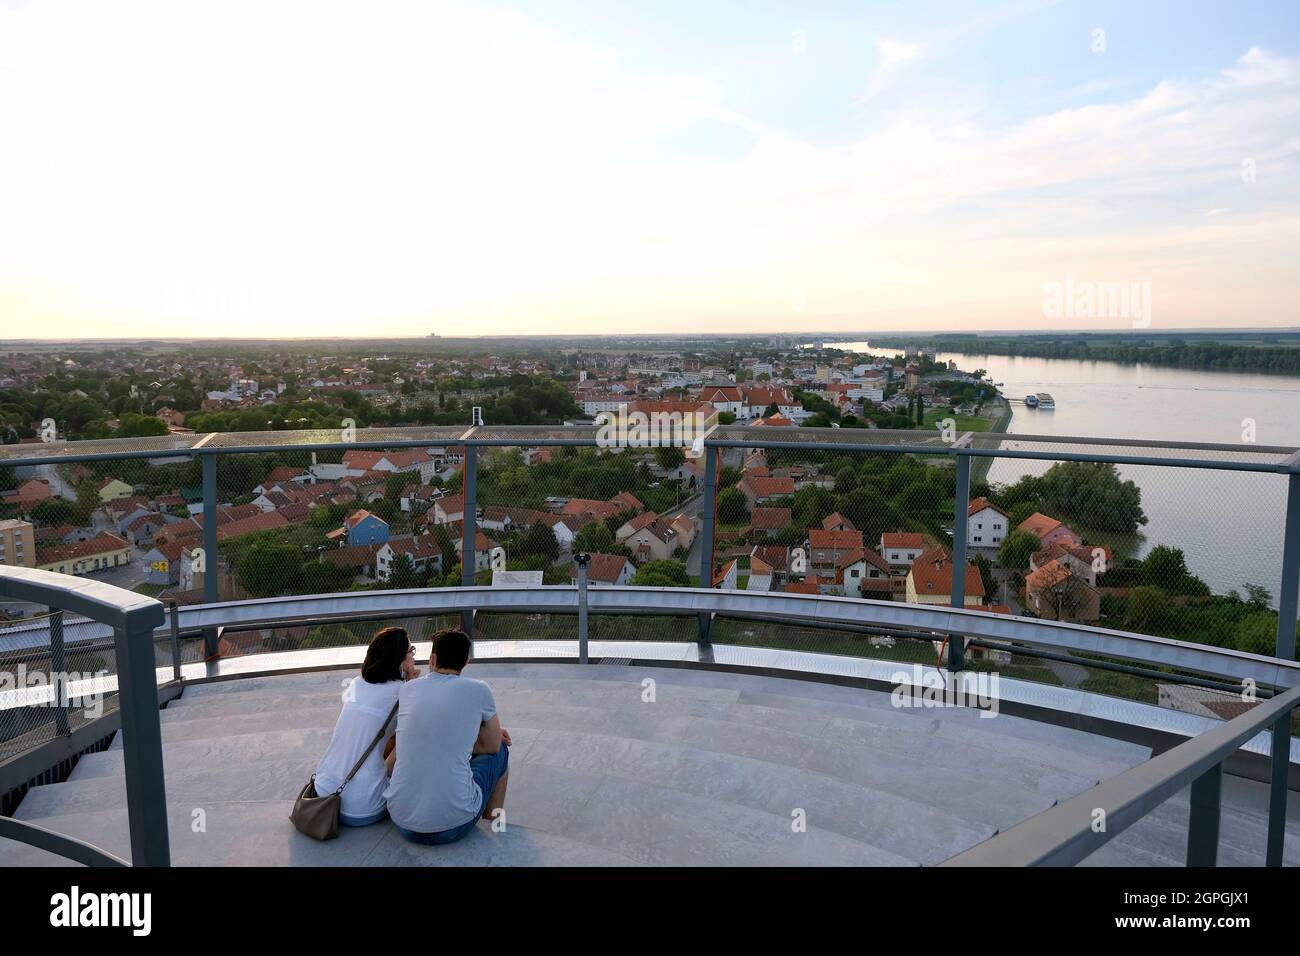 Croatia, Slavonia, Vukovar, the water tower, symbol of the city's resistance against the enemy during the siege of Vukovar in 1991, hit more than 600 times in 3 months, now a memorial, general view of the city with the Danube Stock Photo